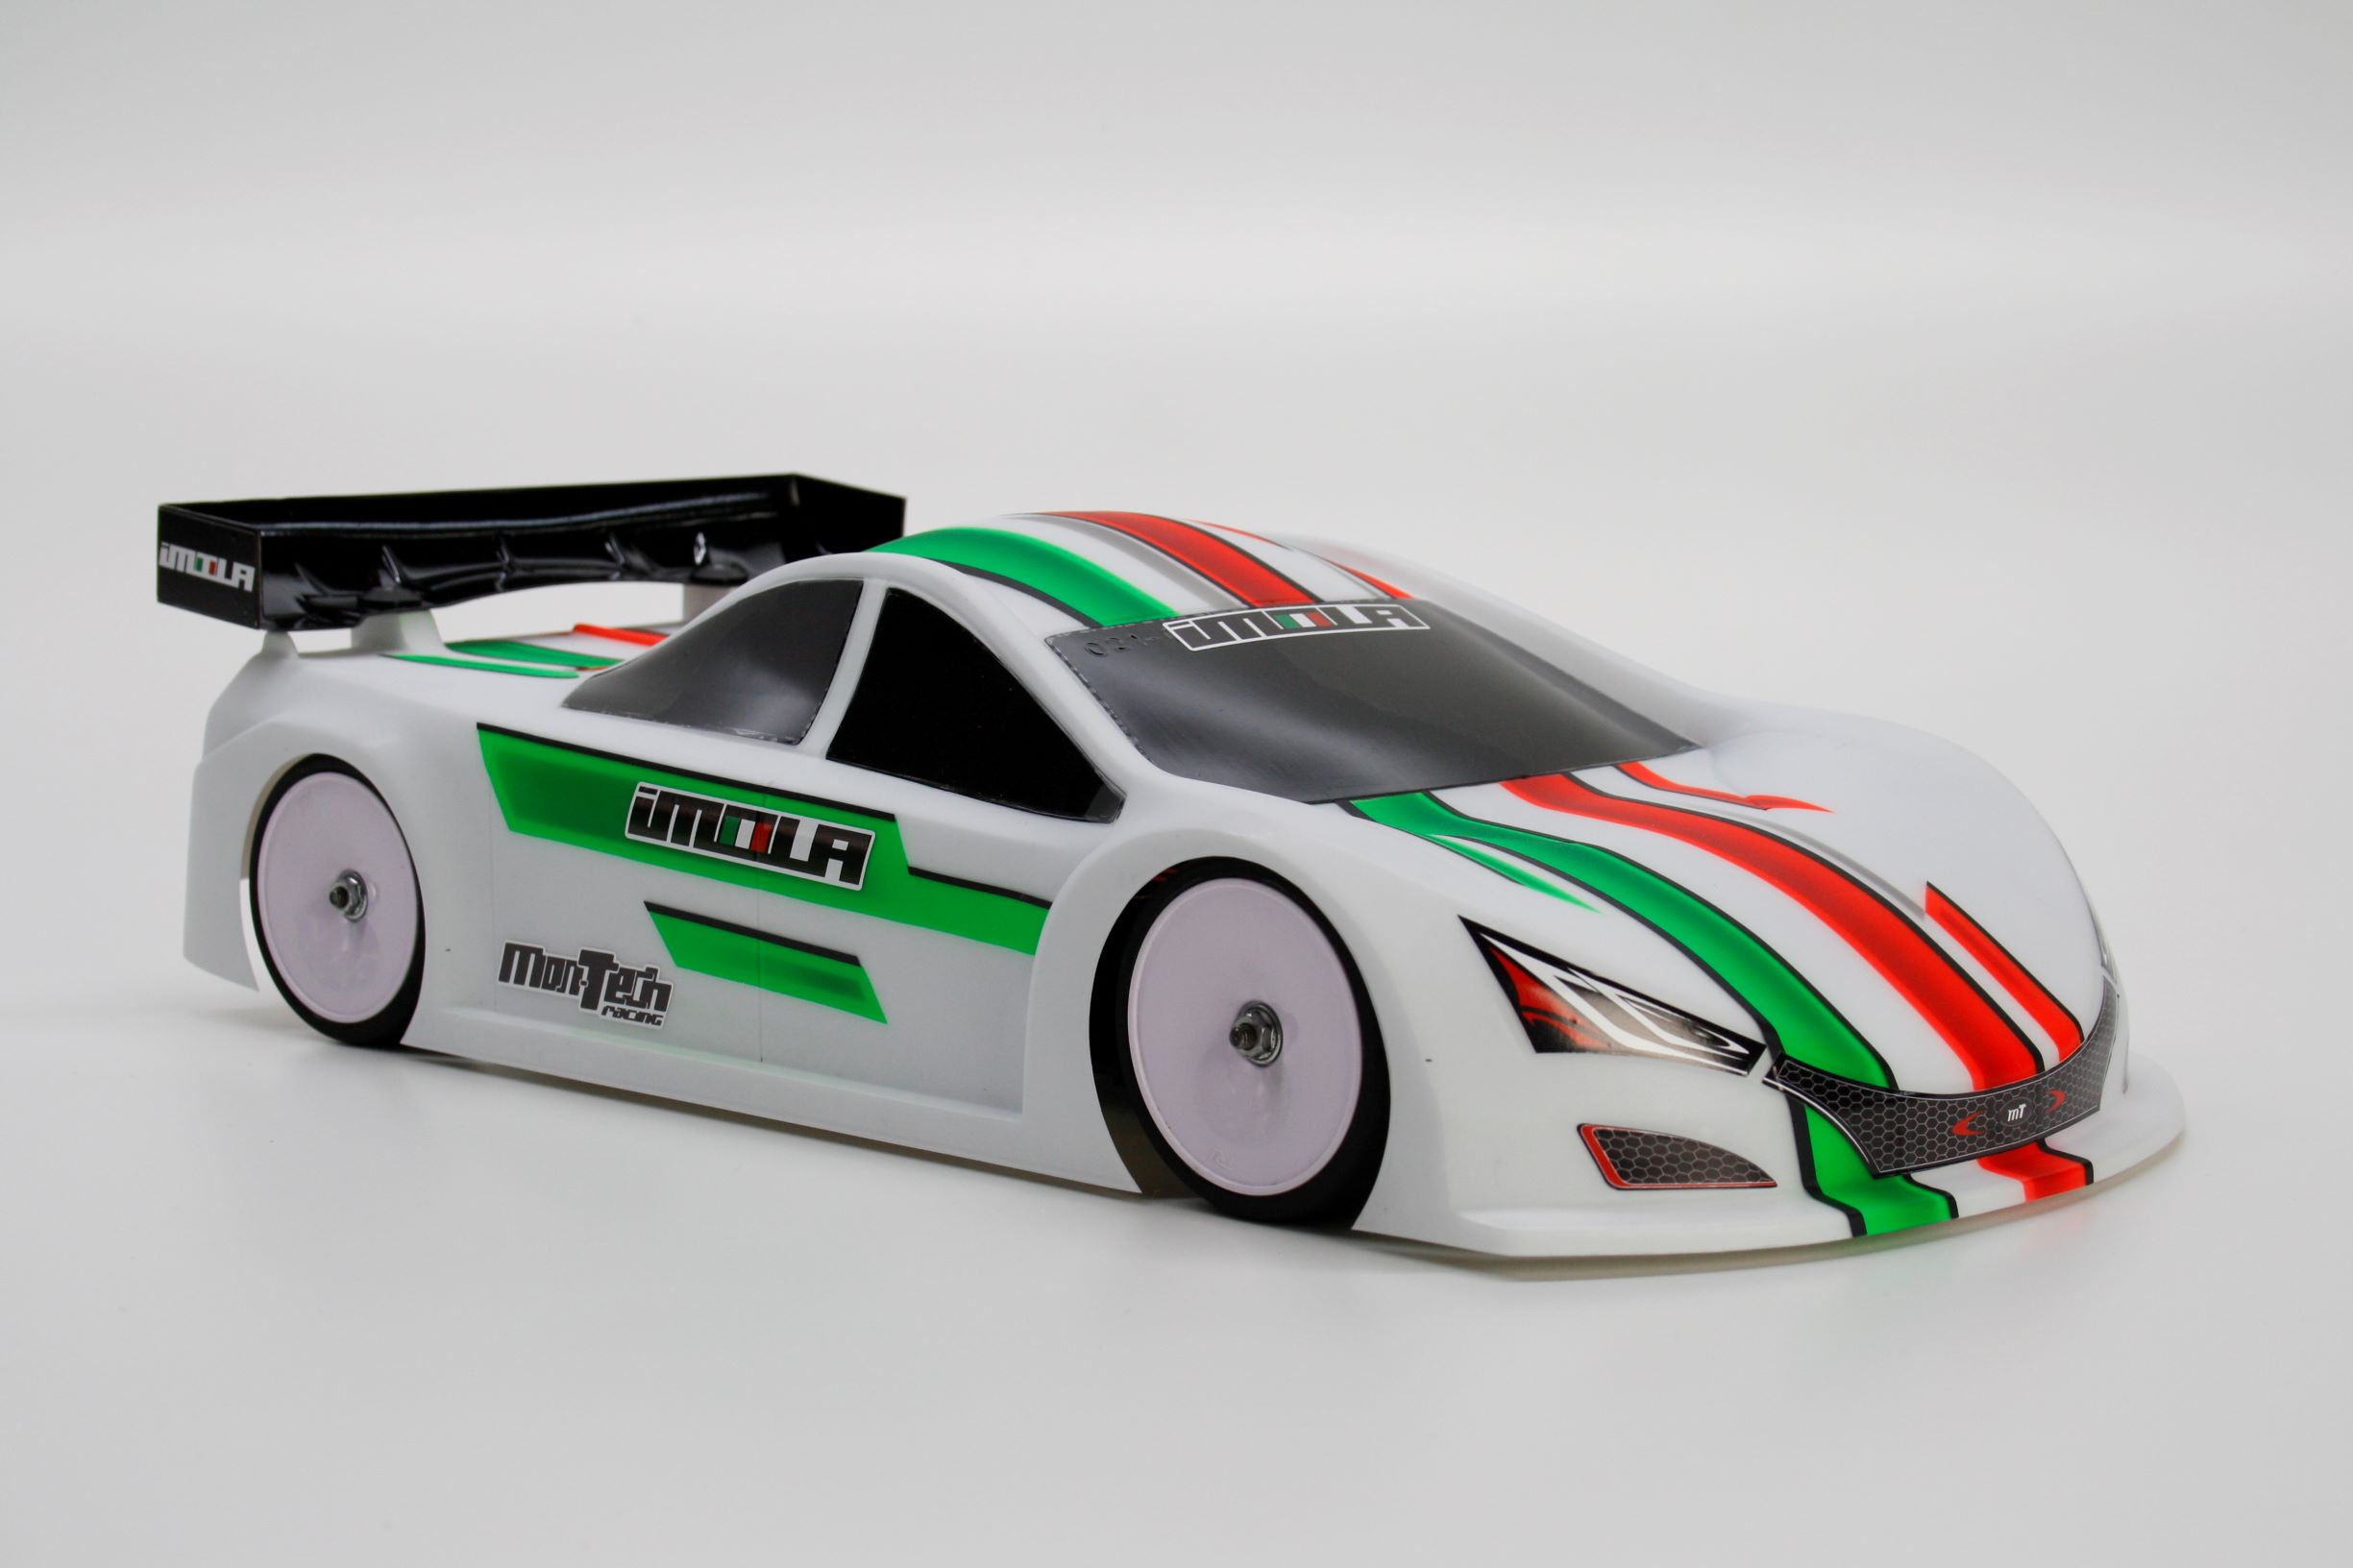 MonTech 021-001 - Imola, 190mm Touring Car Clear Body